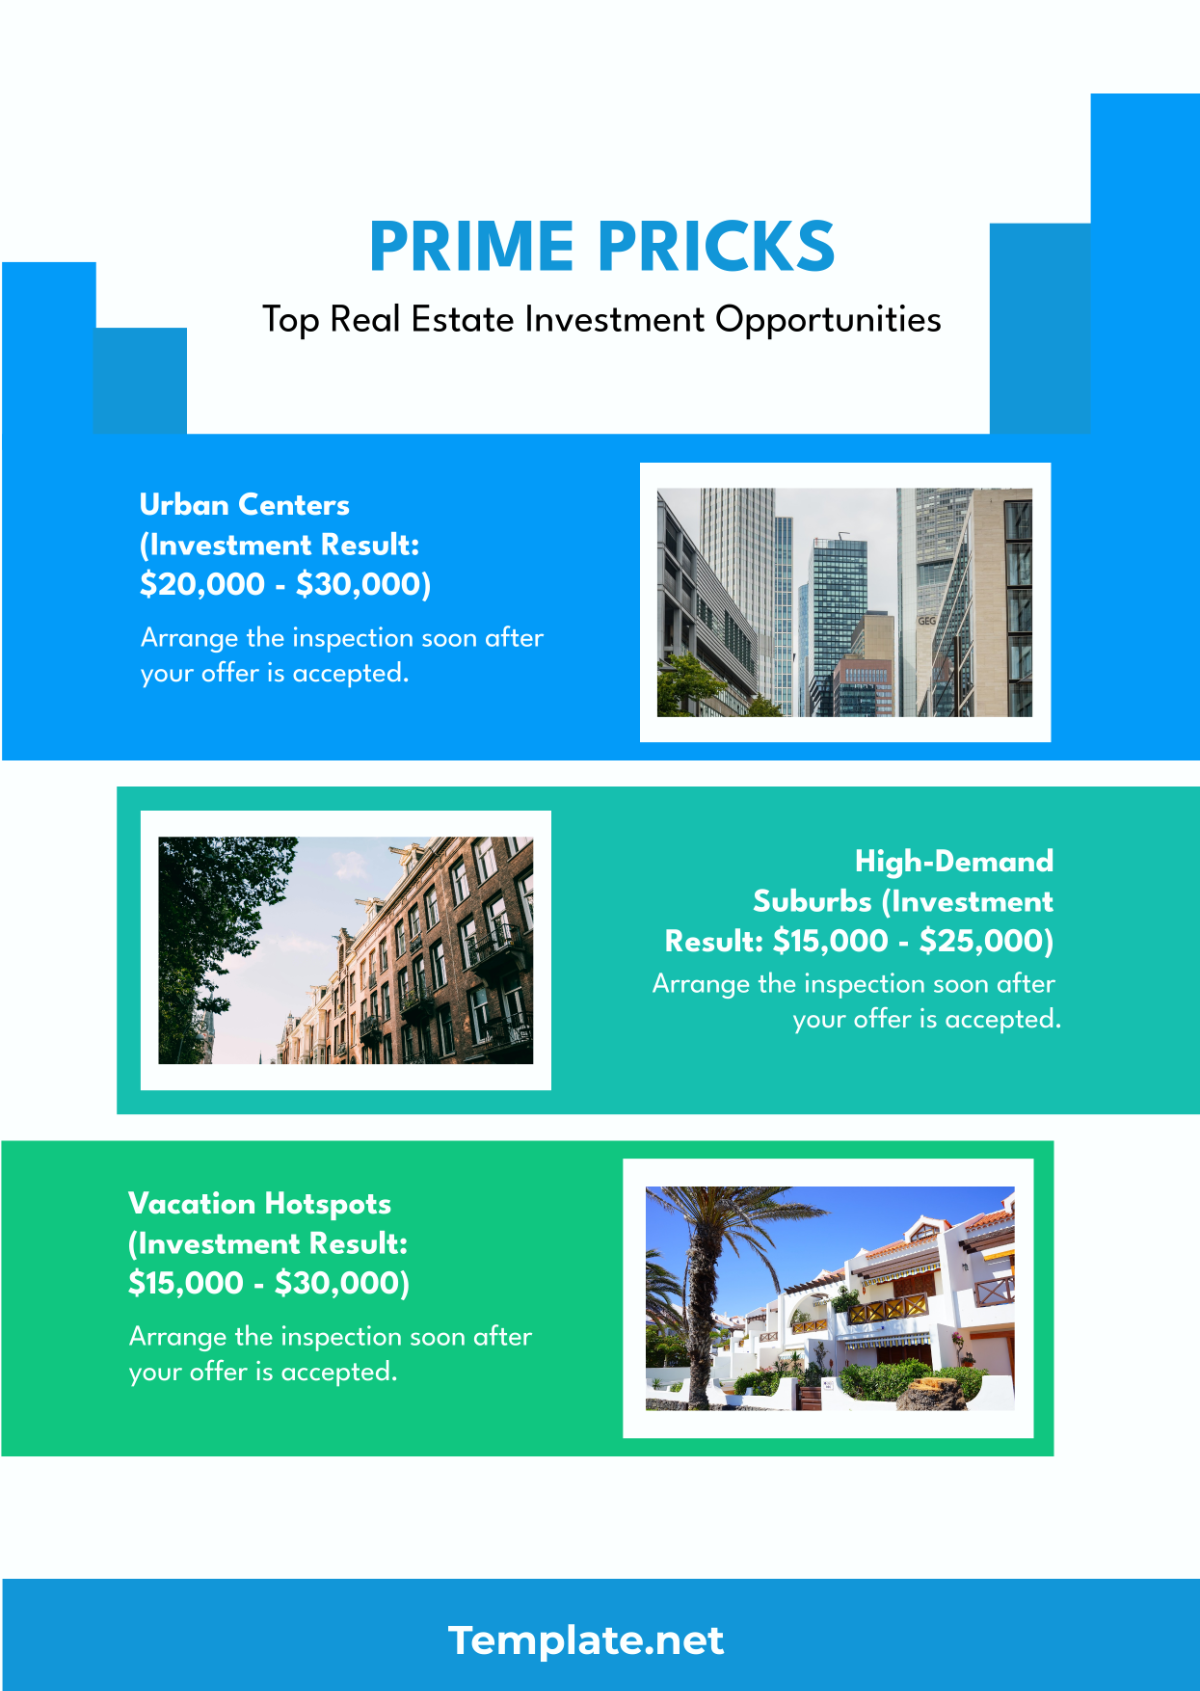 Free Real Estate Best Places To Invest Infographic Template